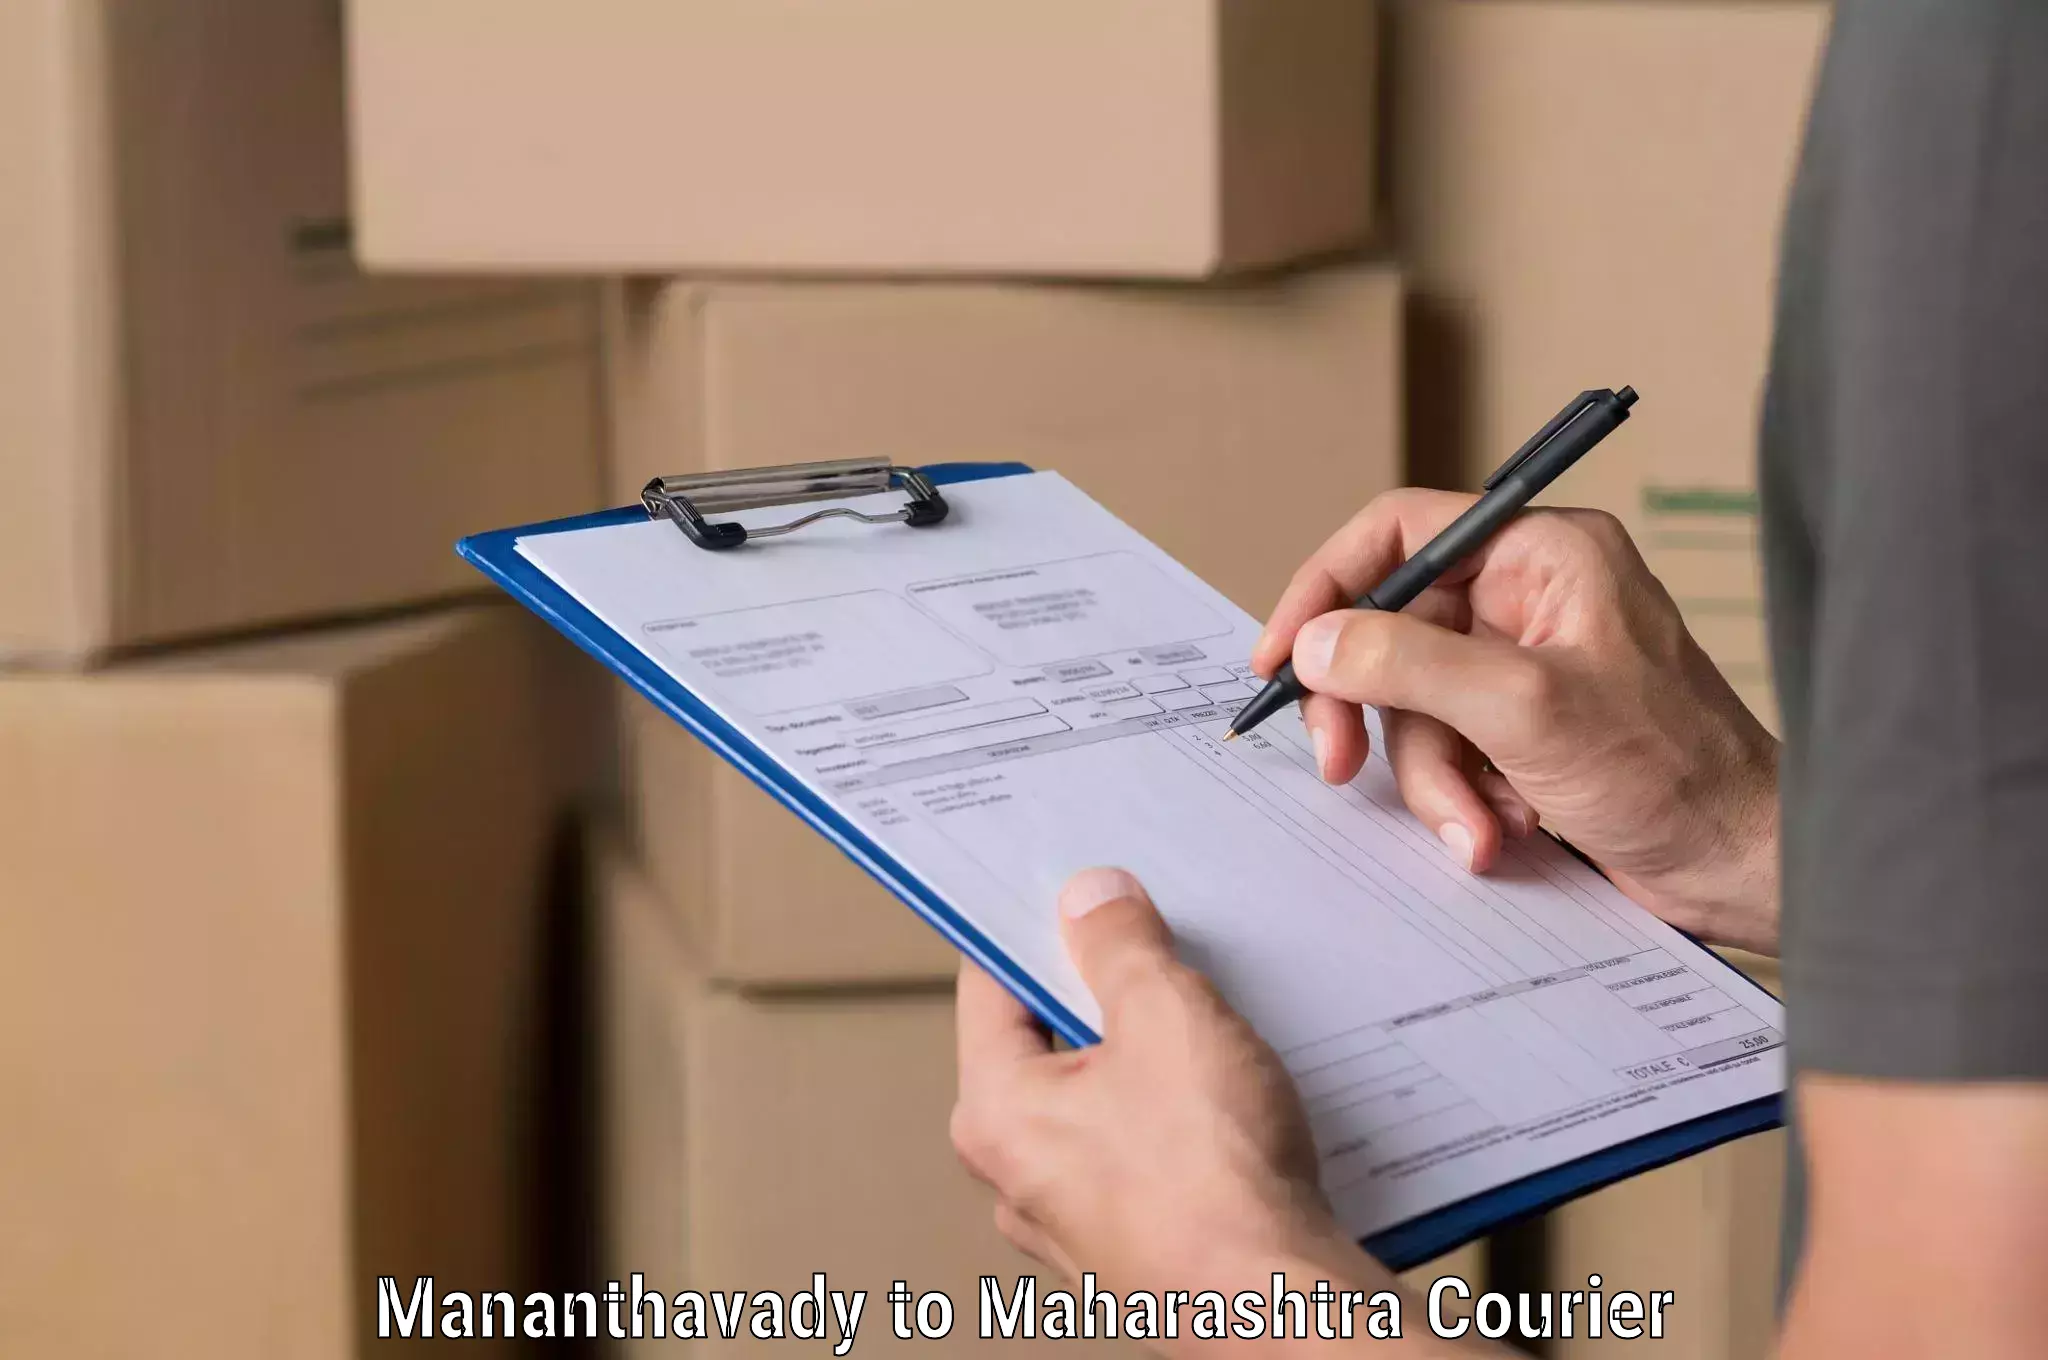 Tailored delivery services Mananthavady to Pune